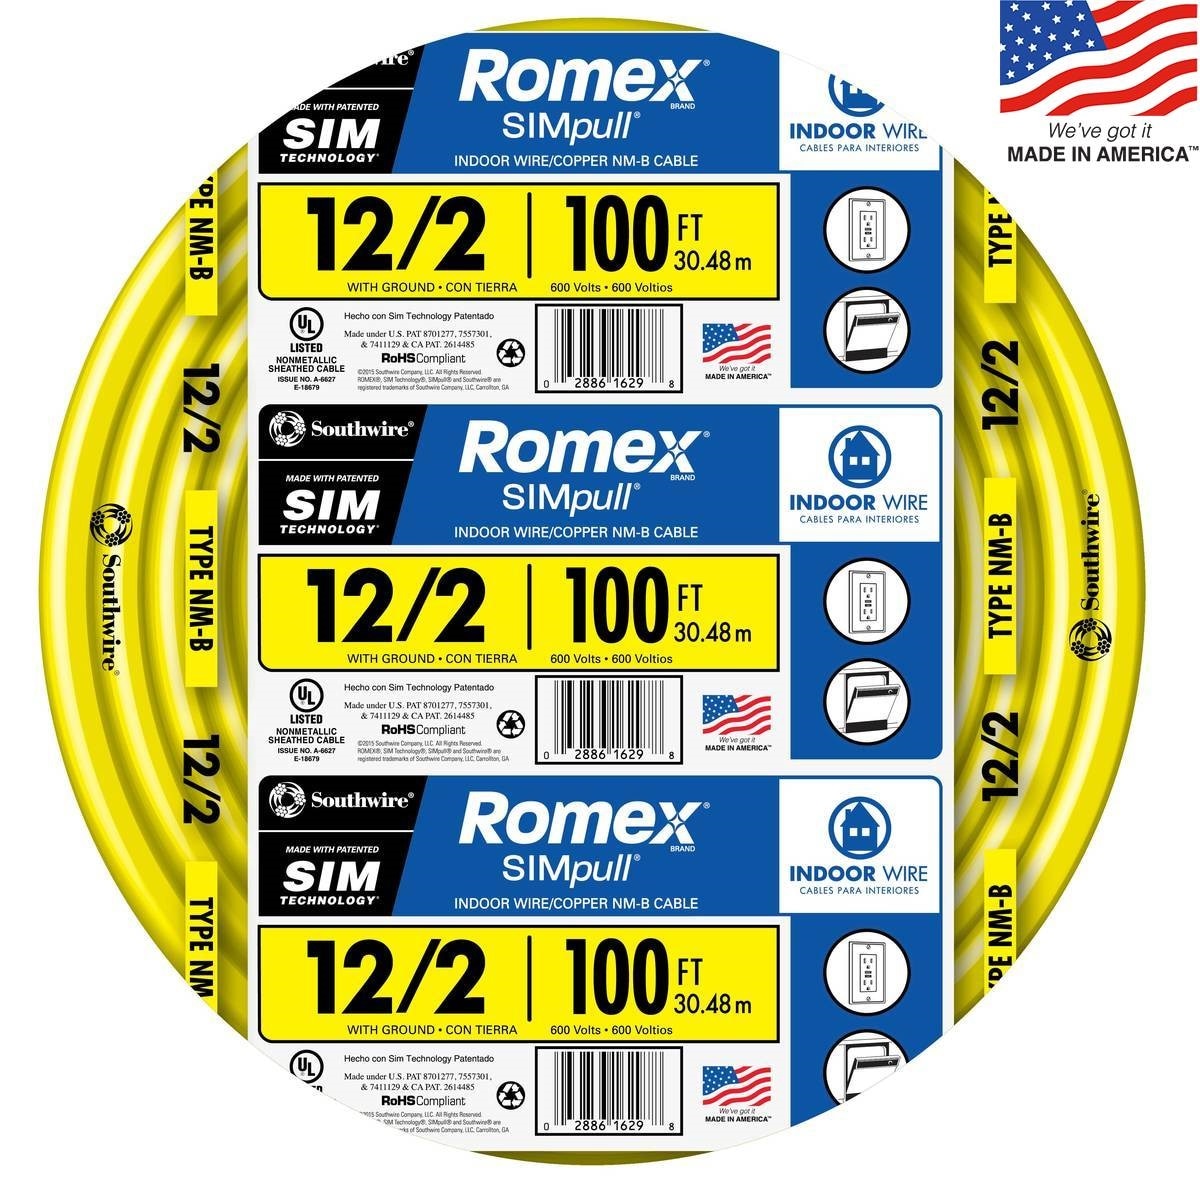 12/2/2 W/GR 150' FT ROMEX INDOOR ELECTRICAL WIRE ALL LENGTHS AVAILABLE 